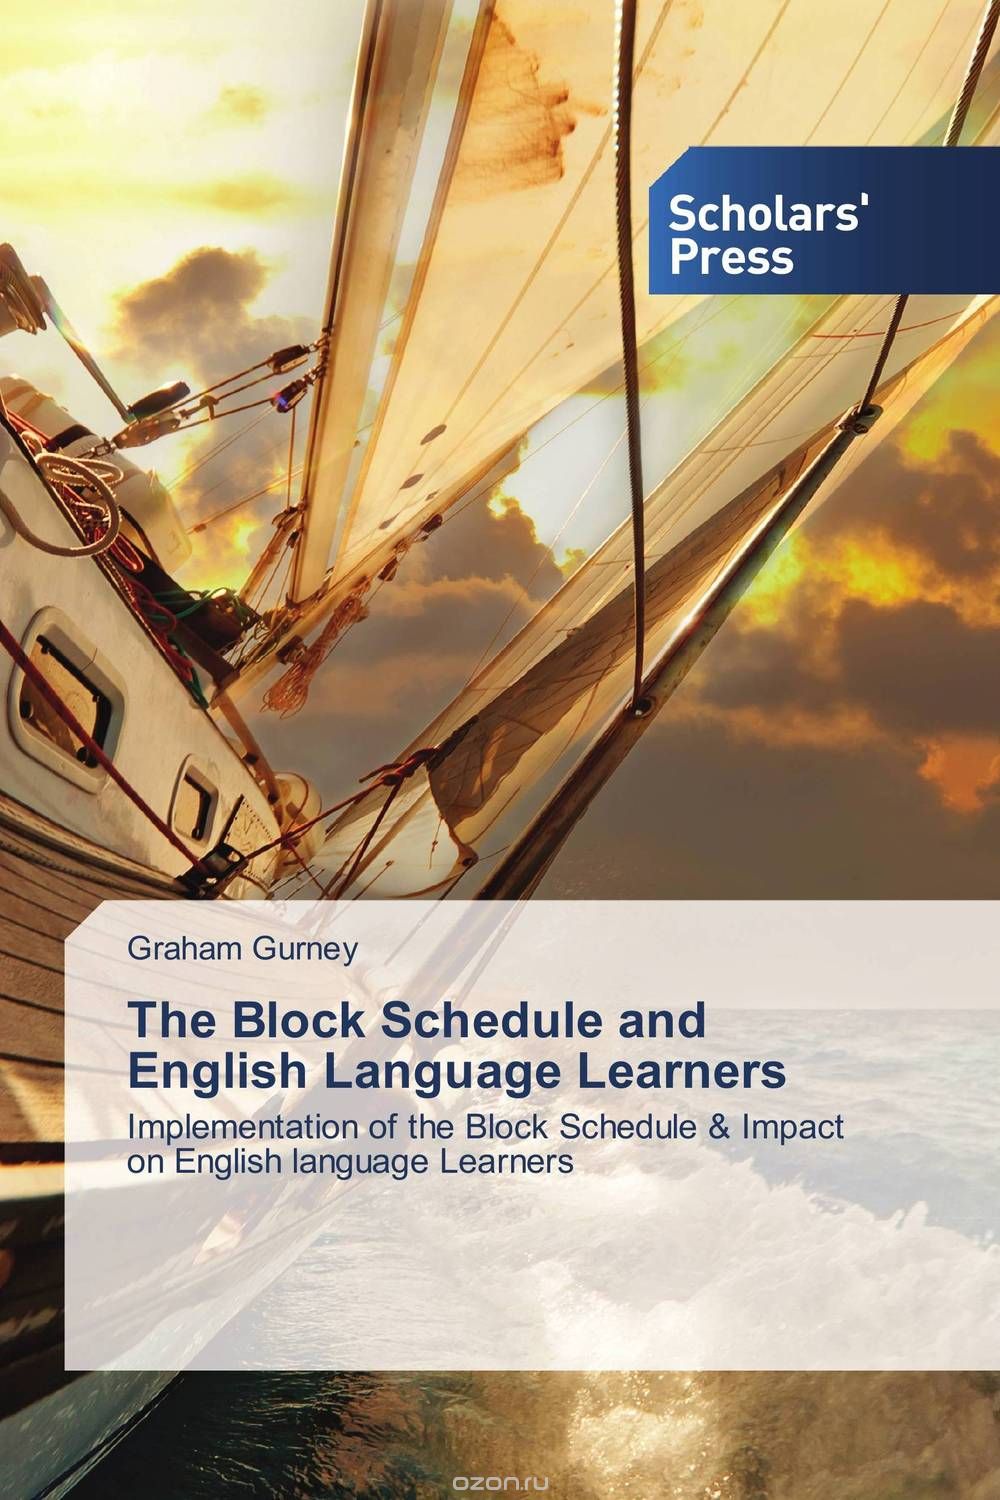 The Block Schedule and English Language Learners